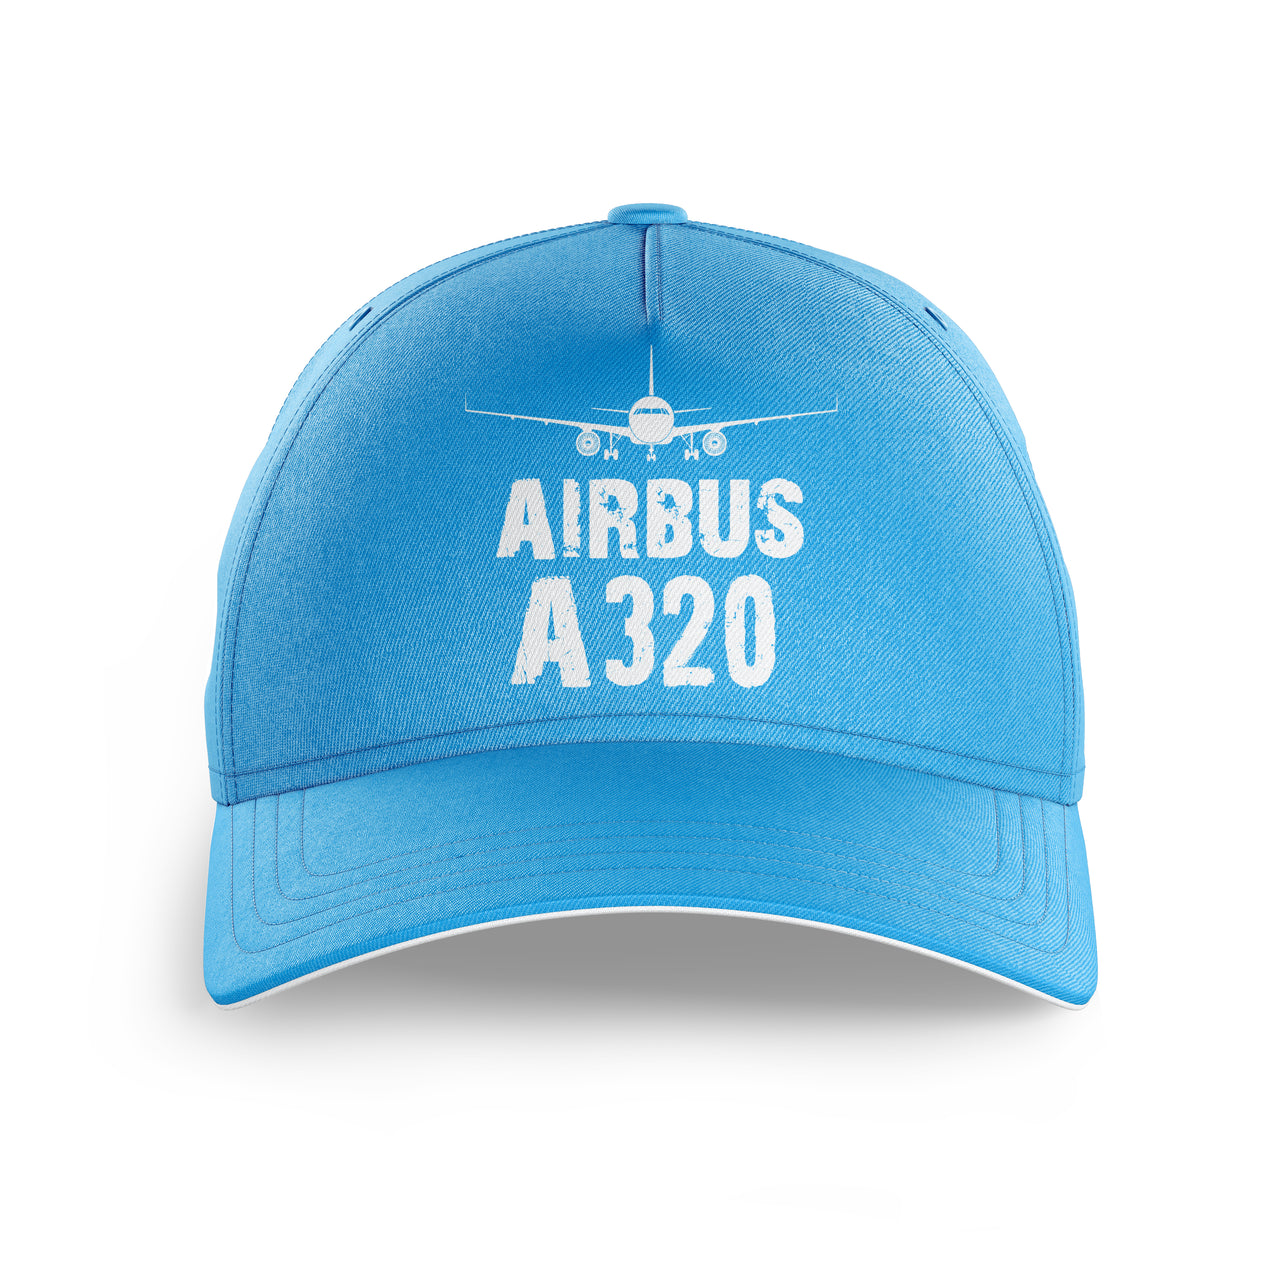 Airbus A320 & Plane Printed Hats